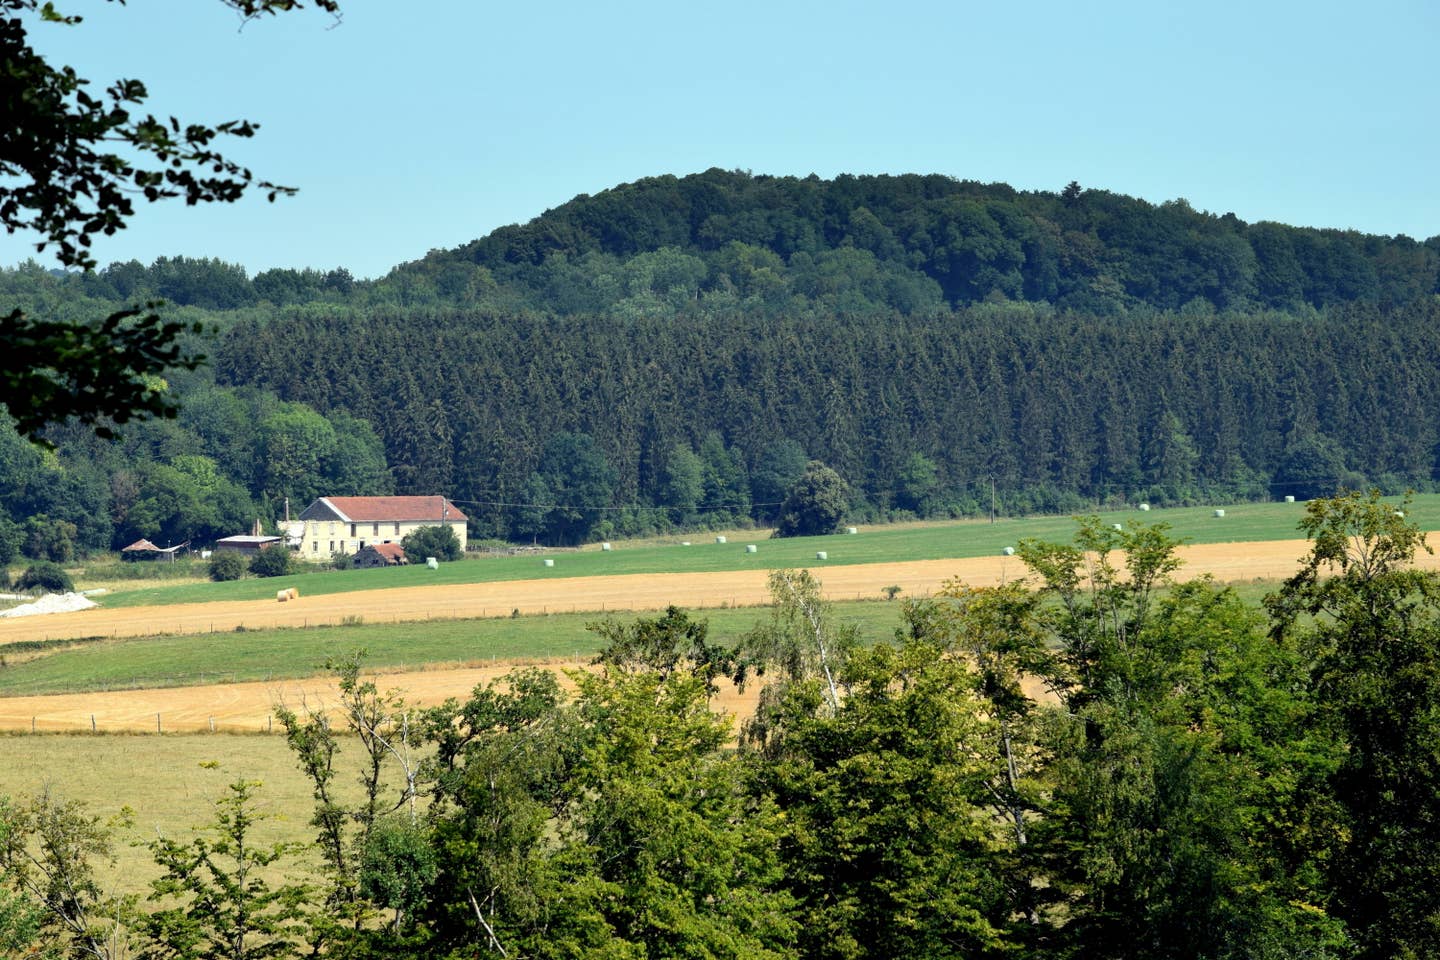 The hill Cote de Chatillon as photographed in 2018. In 1918, this hill was the site of stubborn German defenses which required the sacrifice of 3,000 American casualties to liberate. (Georgia National Guard/ Capt. William Carraway)